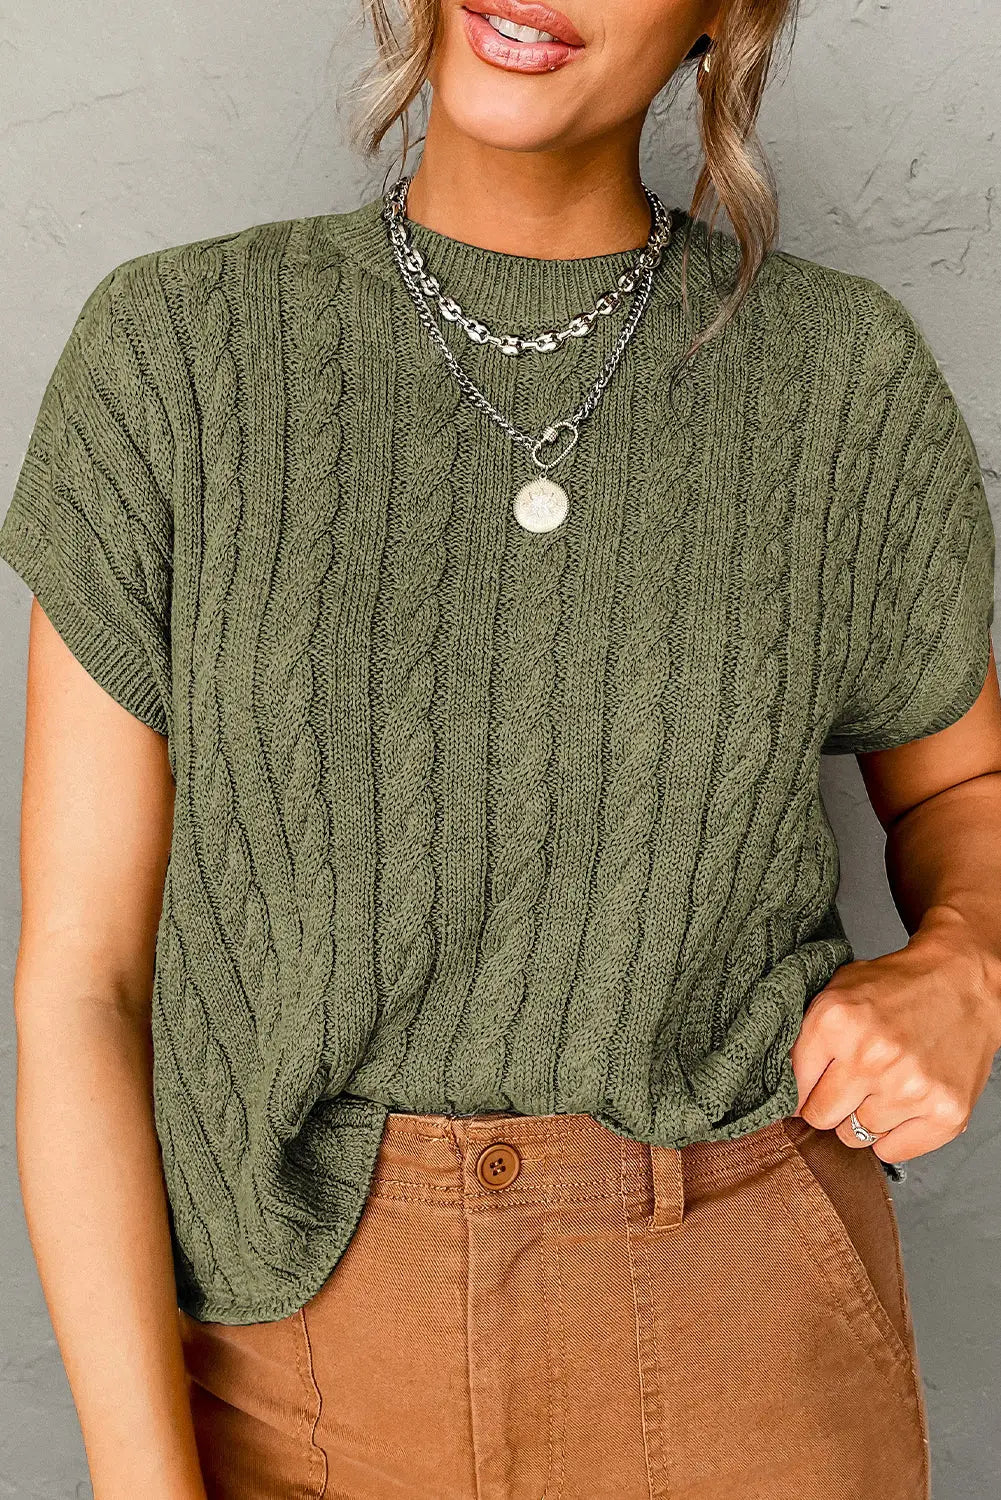 Jungle green crew neck cable knit short sleeve sweater - l / 55% acrylic + 45% cotton - sweaters & cardigans